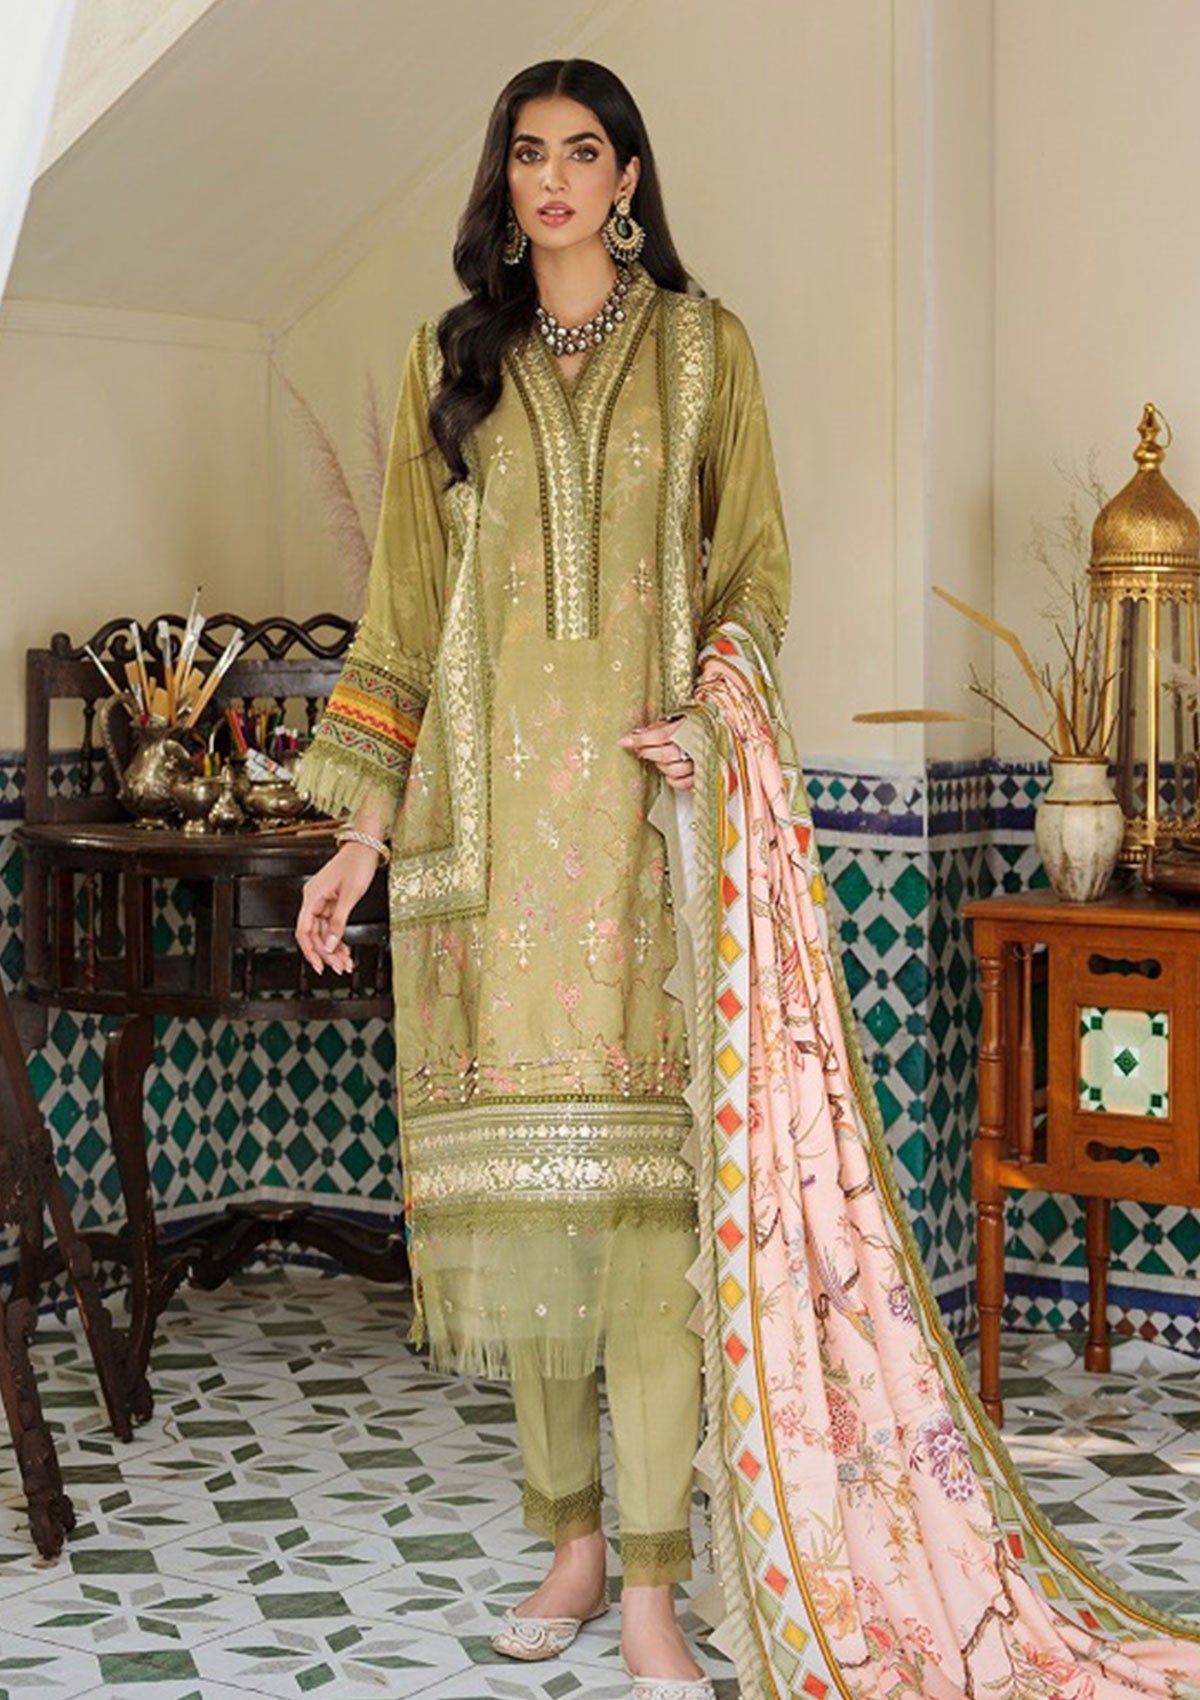 Winter Collection - Noor - Saadia Asad - Prints - NP#7B available at Saleem Fabrics Traditions